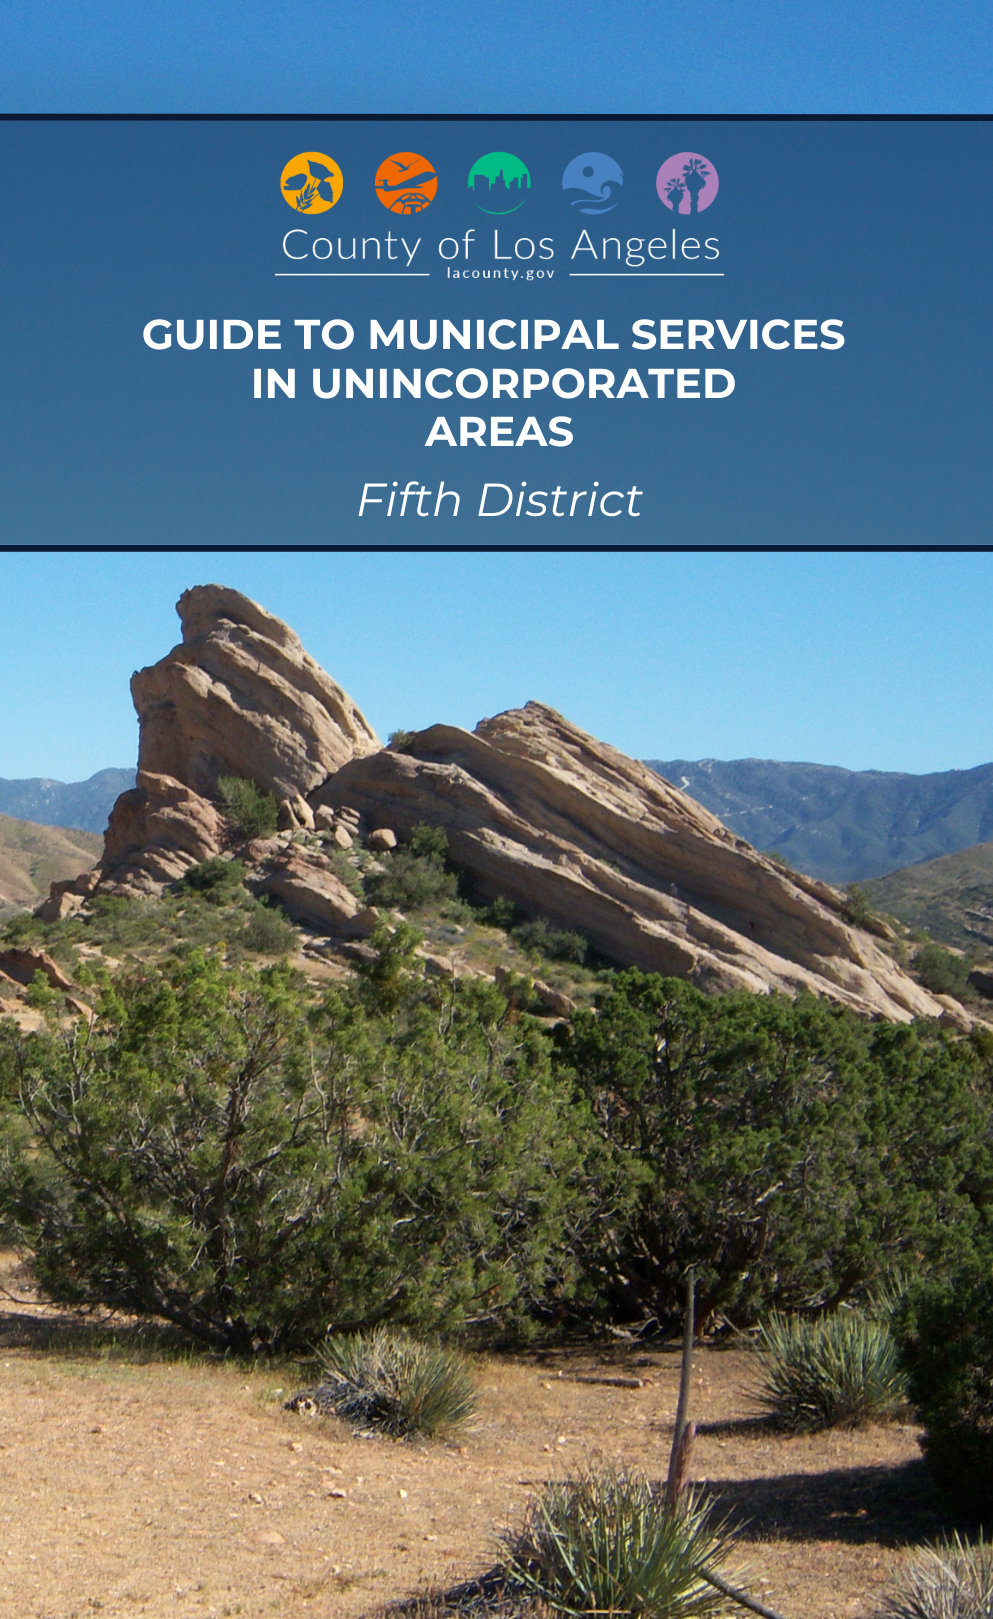 Cover art for the unincorporated services guide for the fourth supervisorial district.